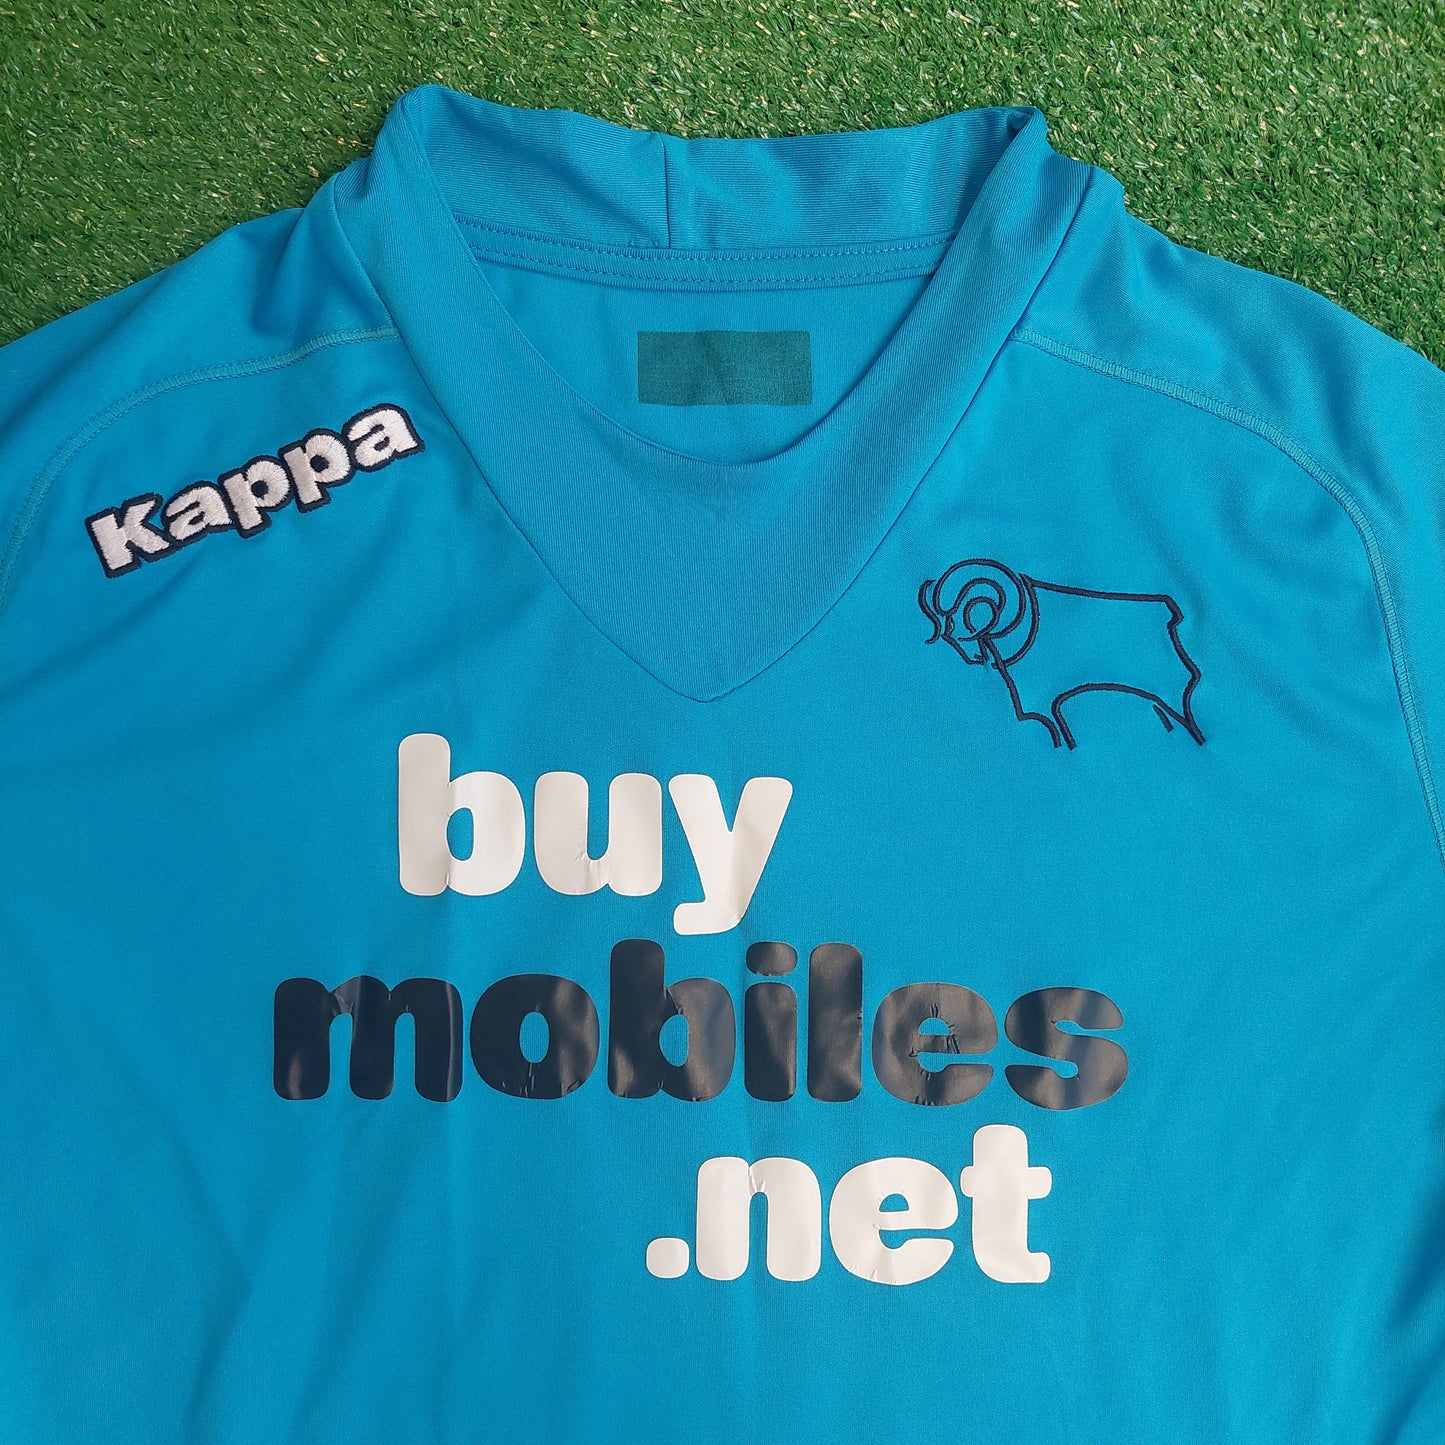 Derby County 2012/13 Third Shirt (Very Good) - Size L